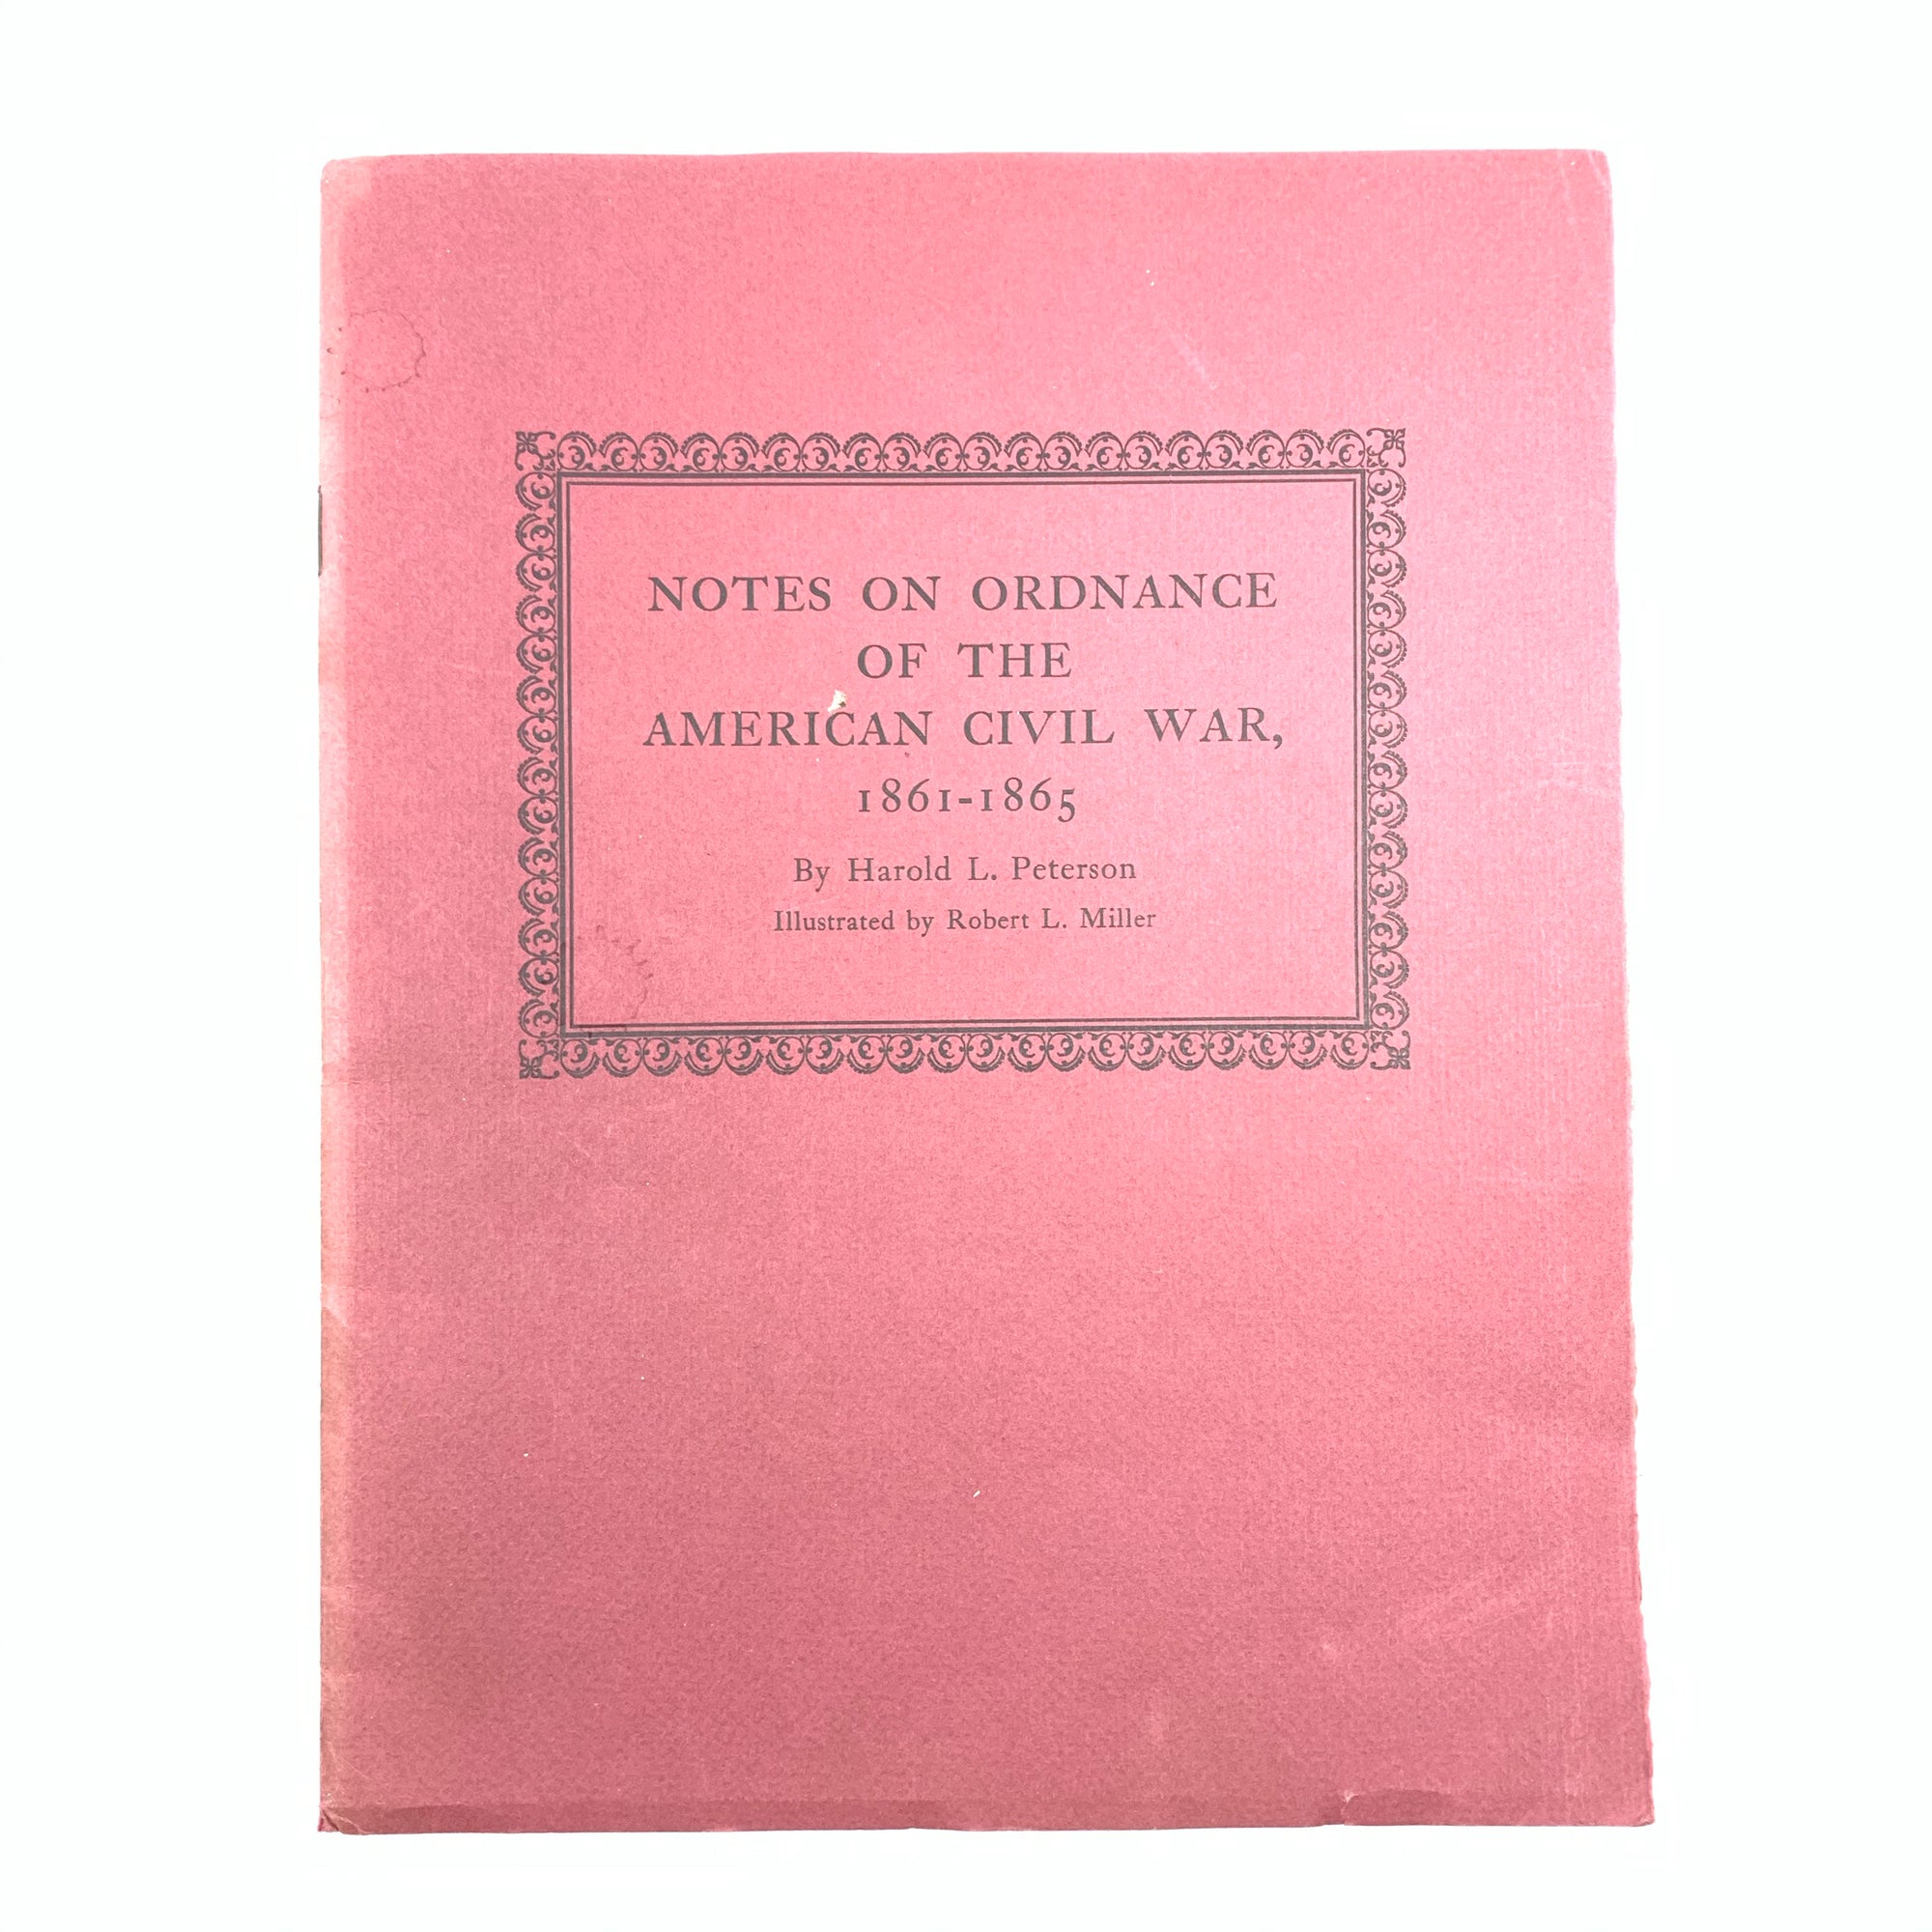 Notes on Ordnance of the American Civil War HL Peterson SB 20 pgs 1959